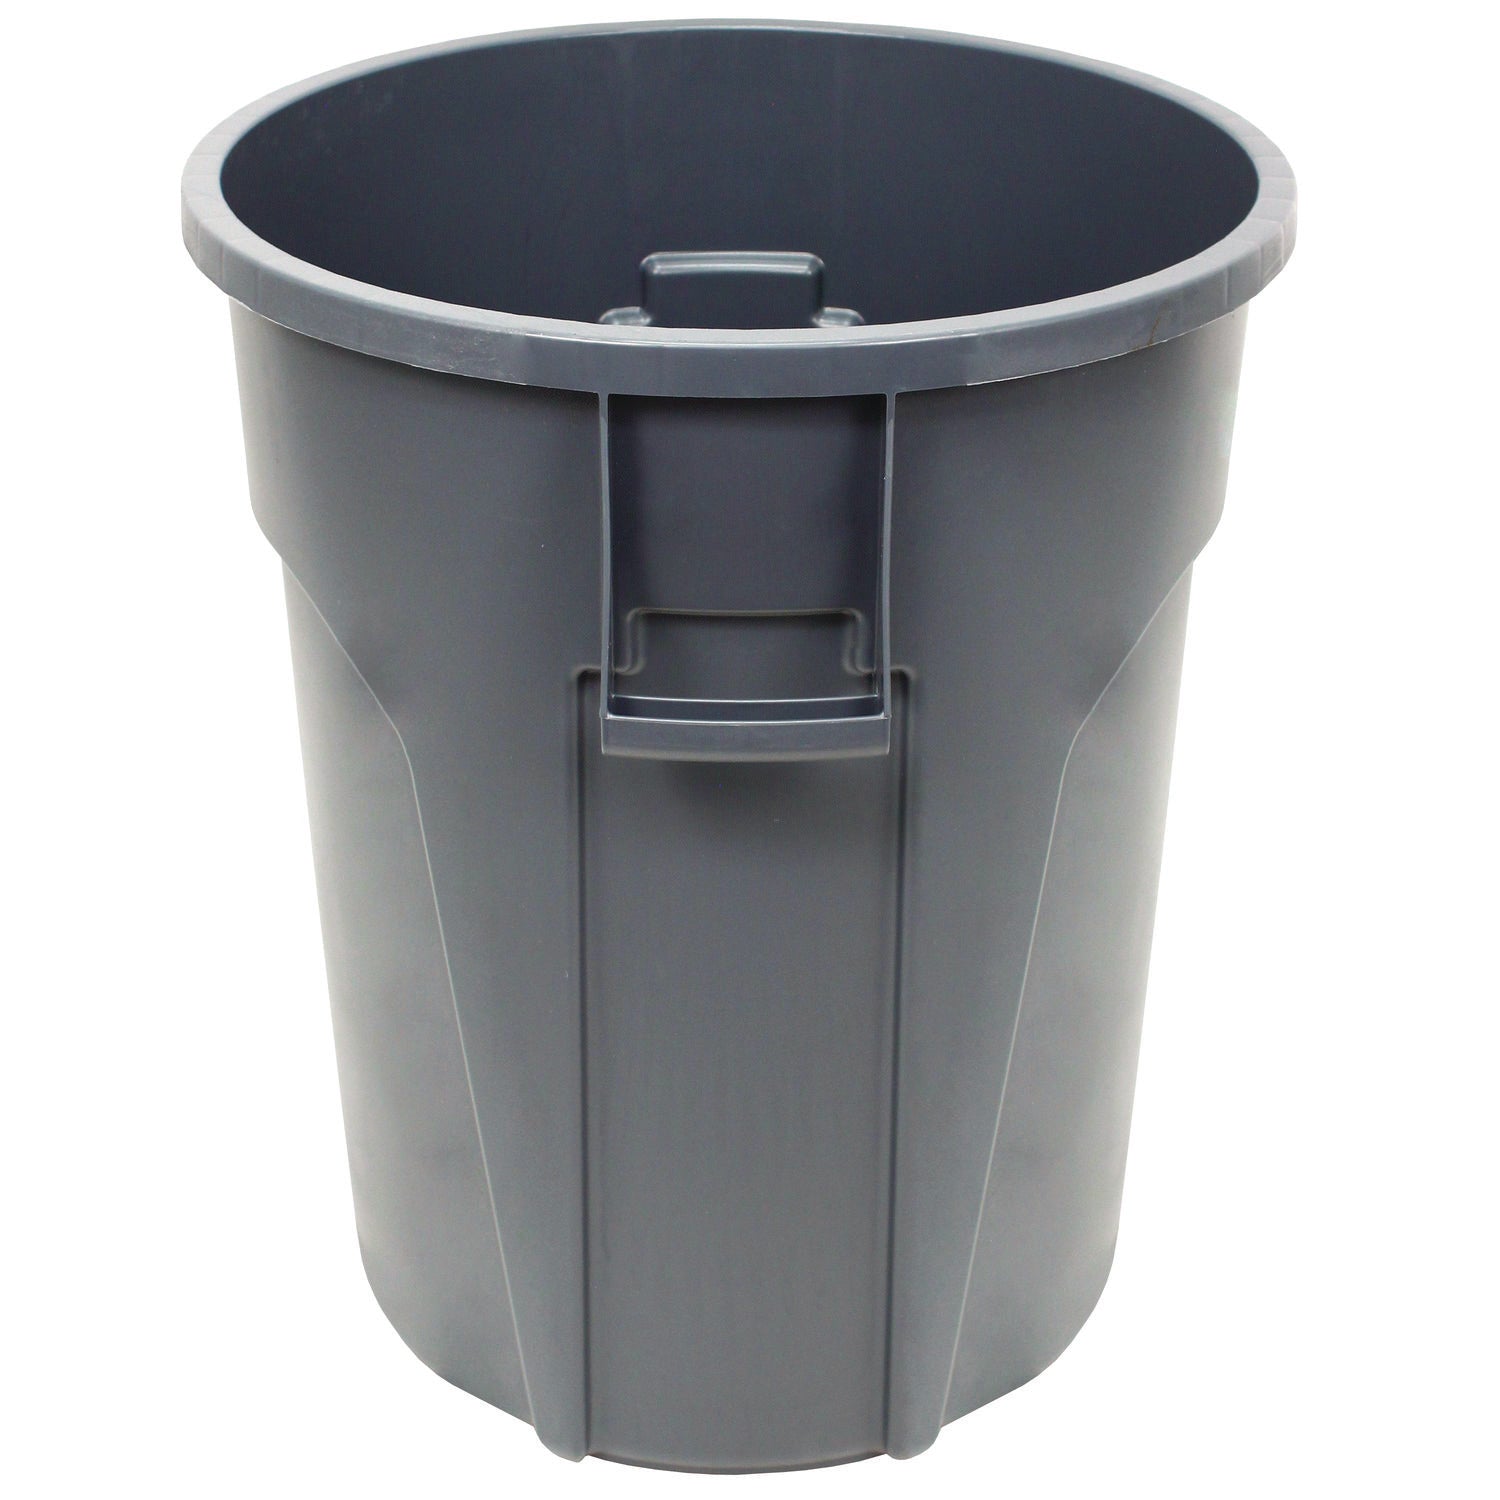 value-plus-containers-20-gal-low-density-polyethylene-gray_impgc200103 - 4